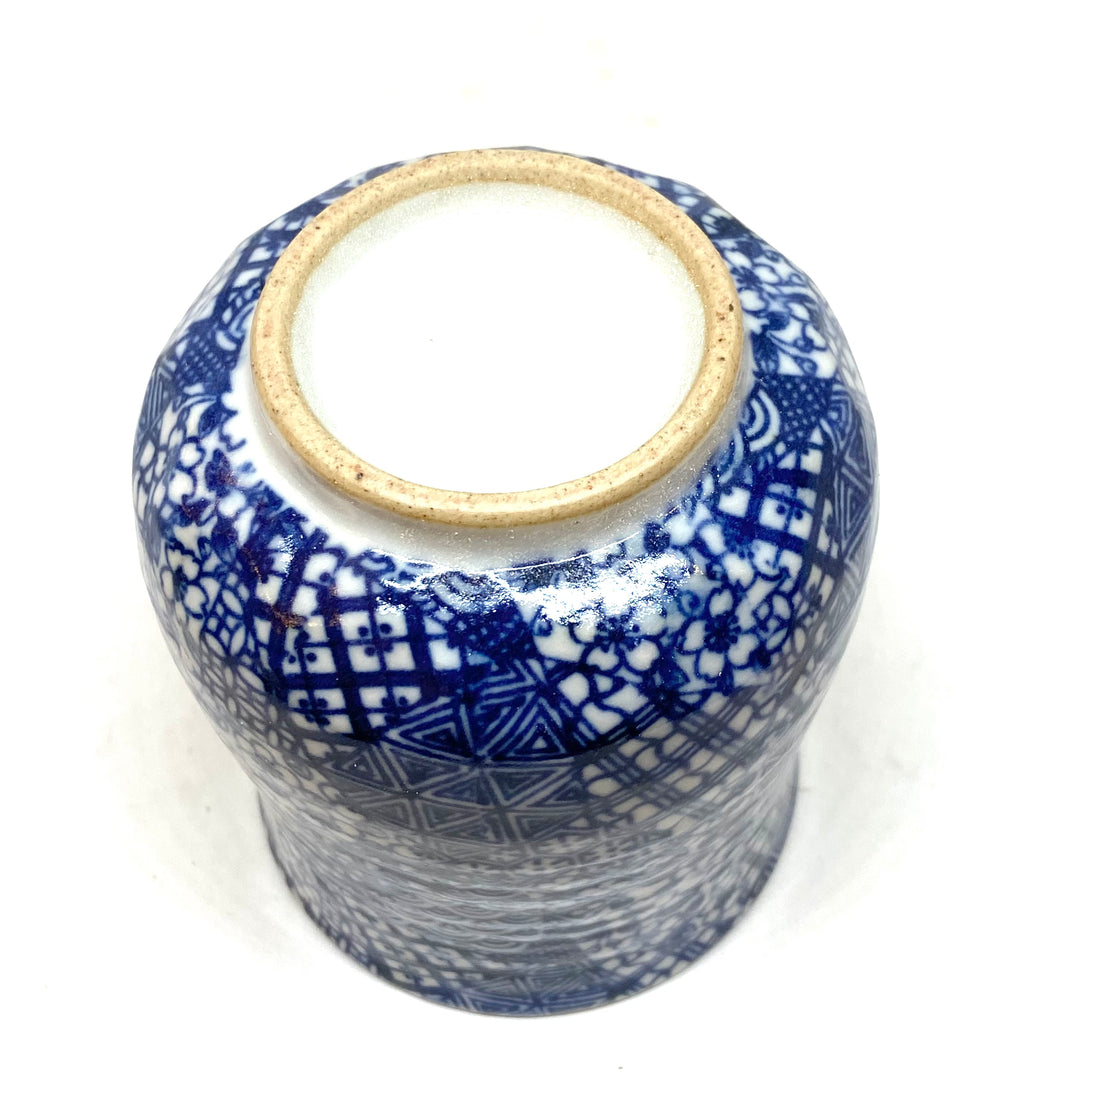 Japanese Tea Cup - Sometsuke - Blue and White Patchwork